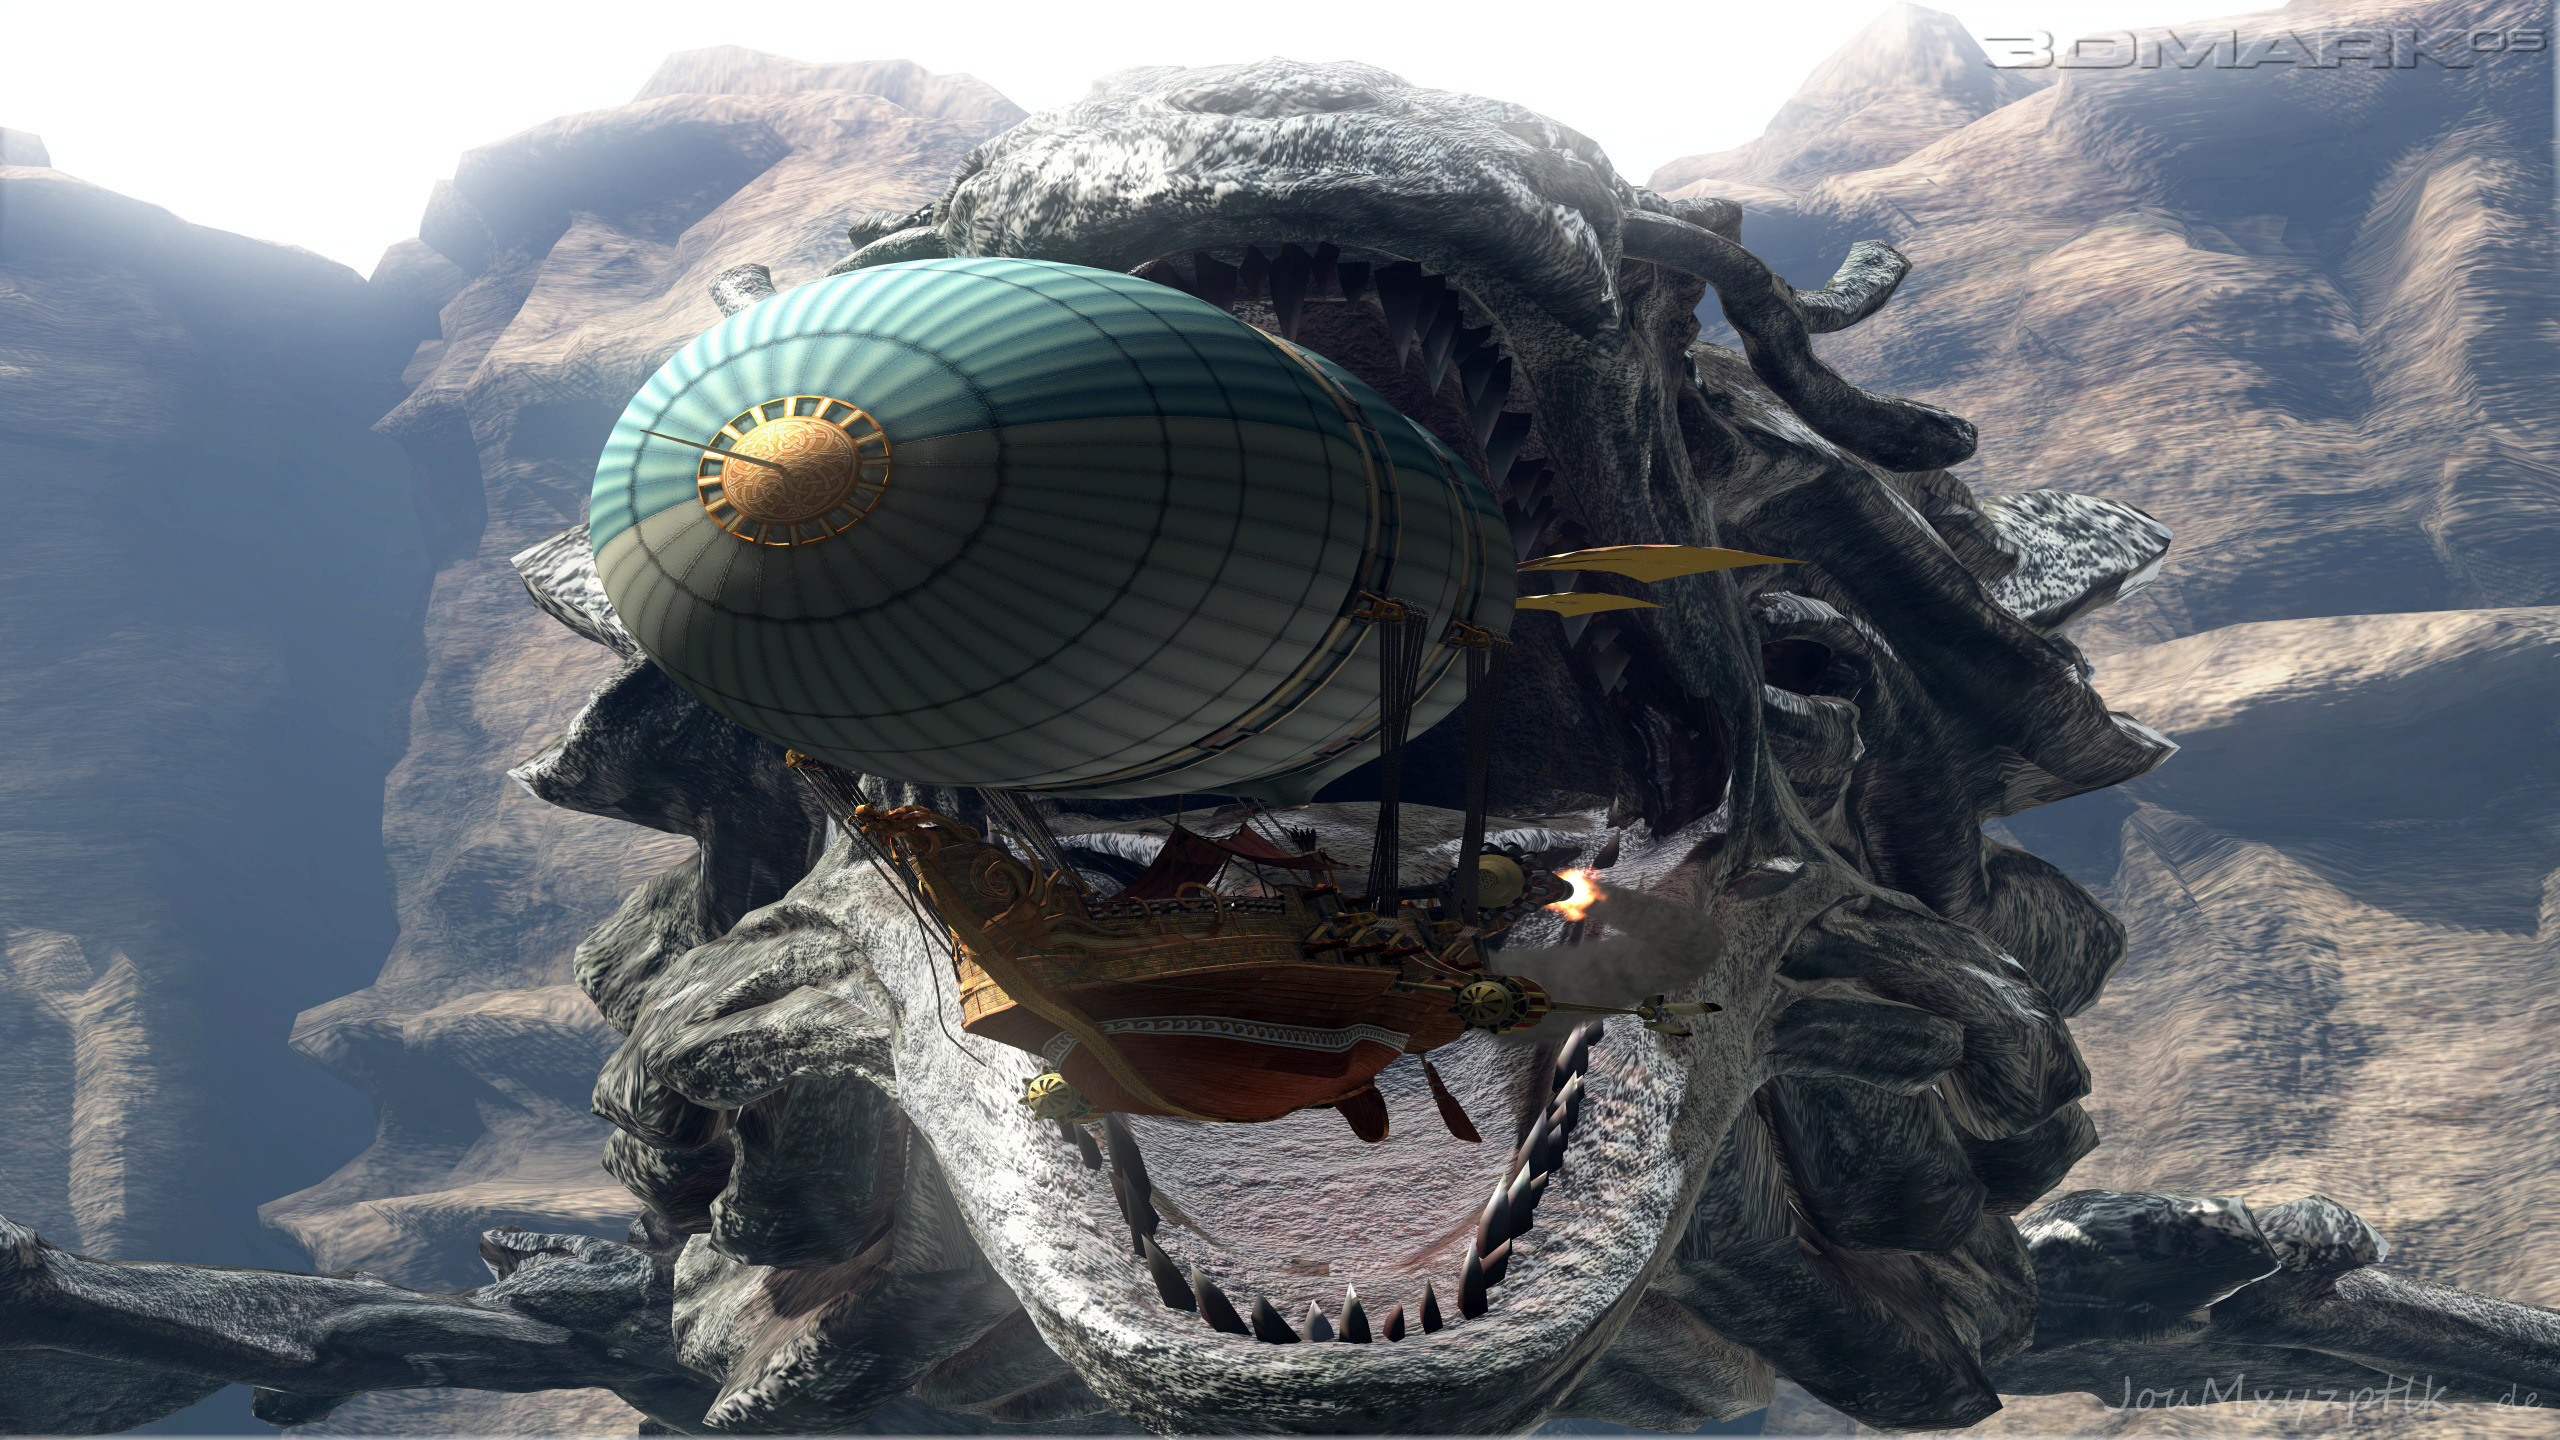 Video Games, Rigid Airship, Flying Objects. Wallpaper in 2560x1440 Resolution